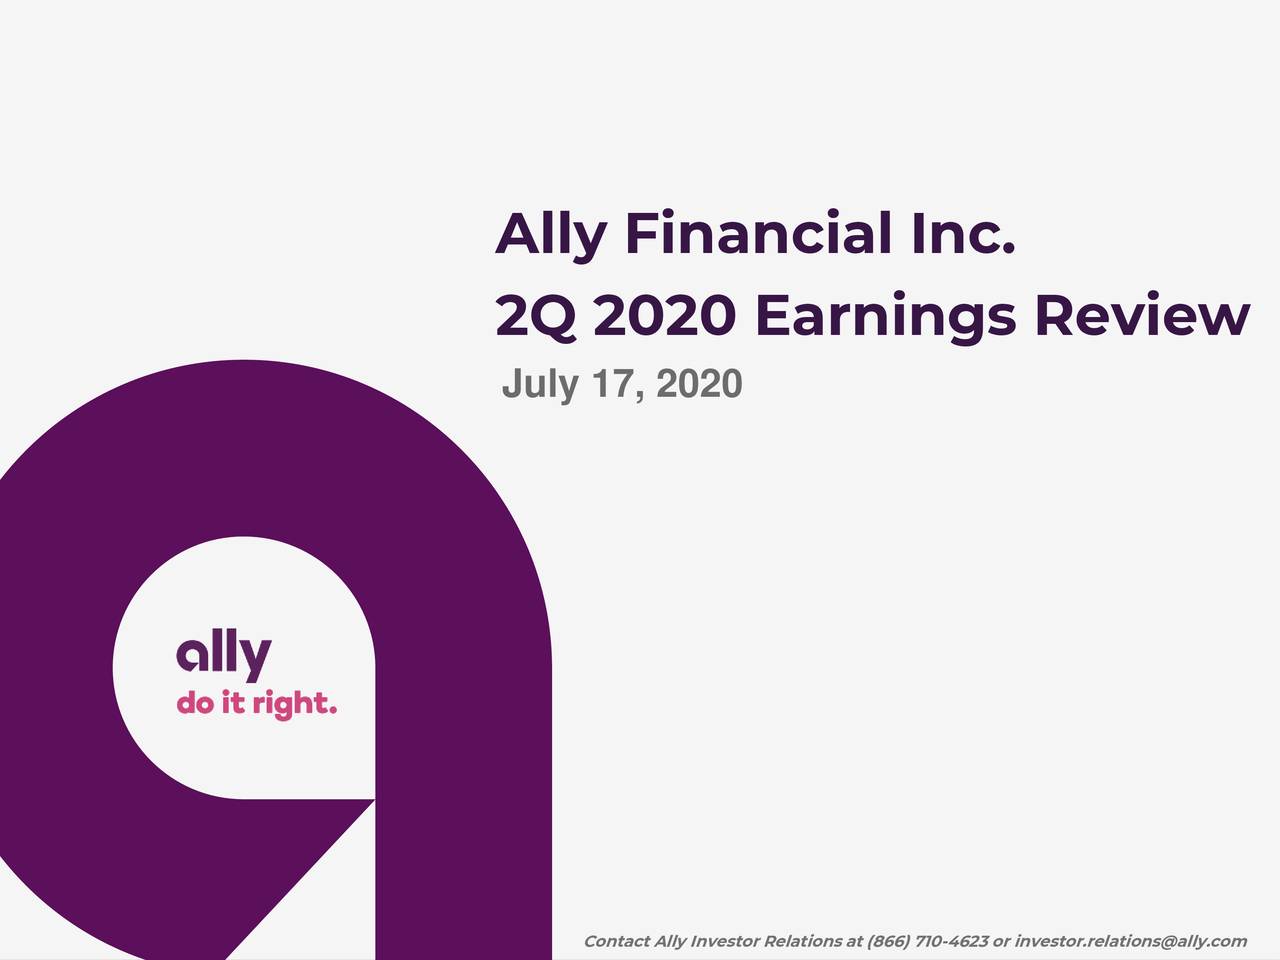 Ally Financial Inc. 2020 Q2 Results Earnings Call Presentation